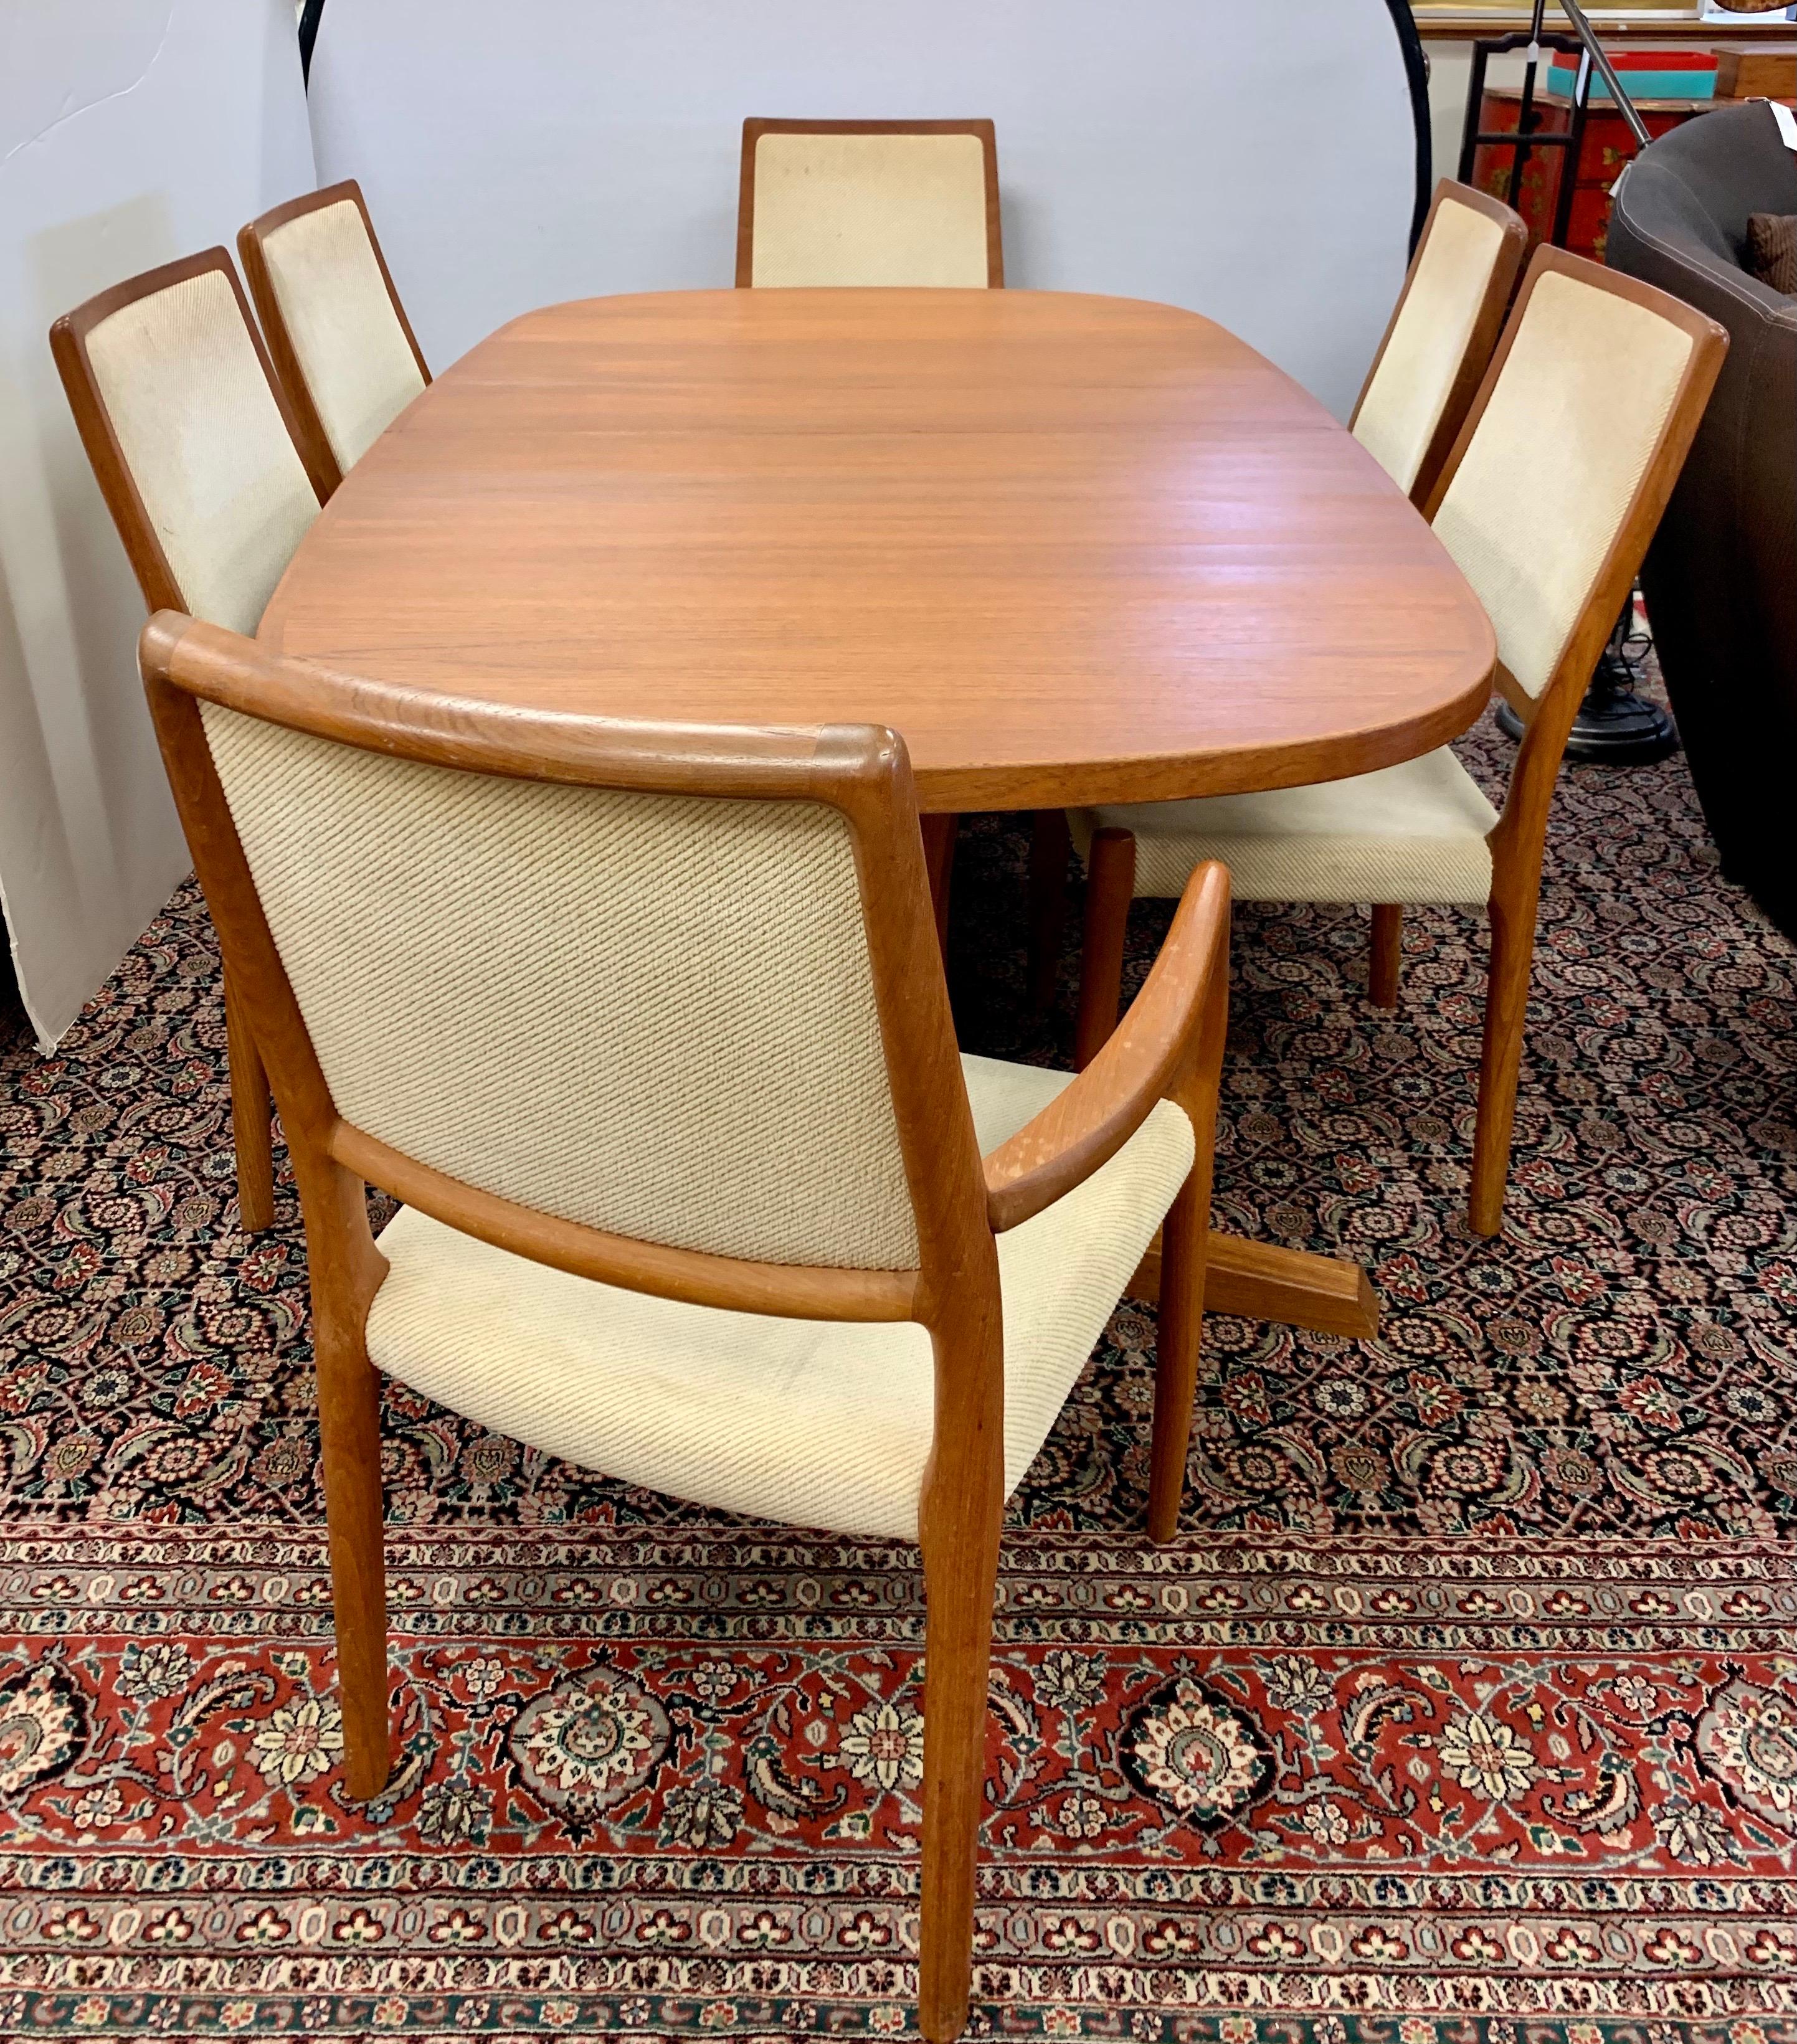 A magnificent original dining set of six chairs and matching table by Danish designer Niels Otto Møller, and manufactured by JL Møllers Møbelfabrik featuring frames made of solid teak and seating made of original neutral upholstered fabric. Why not